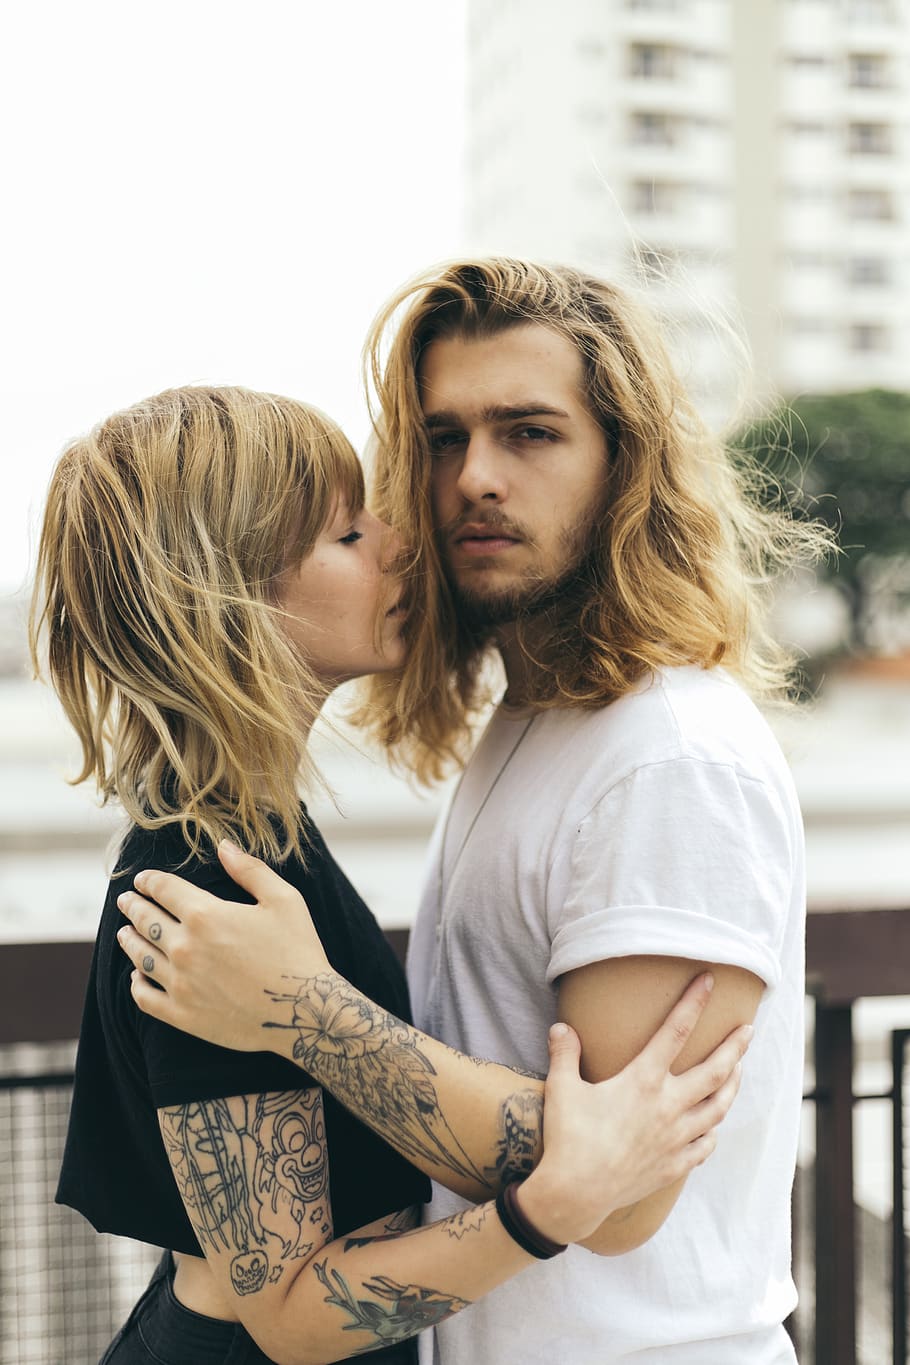 Man and Woman Facing Each Other Outside, blond hair, blurred background